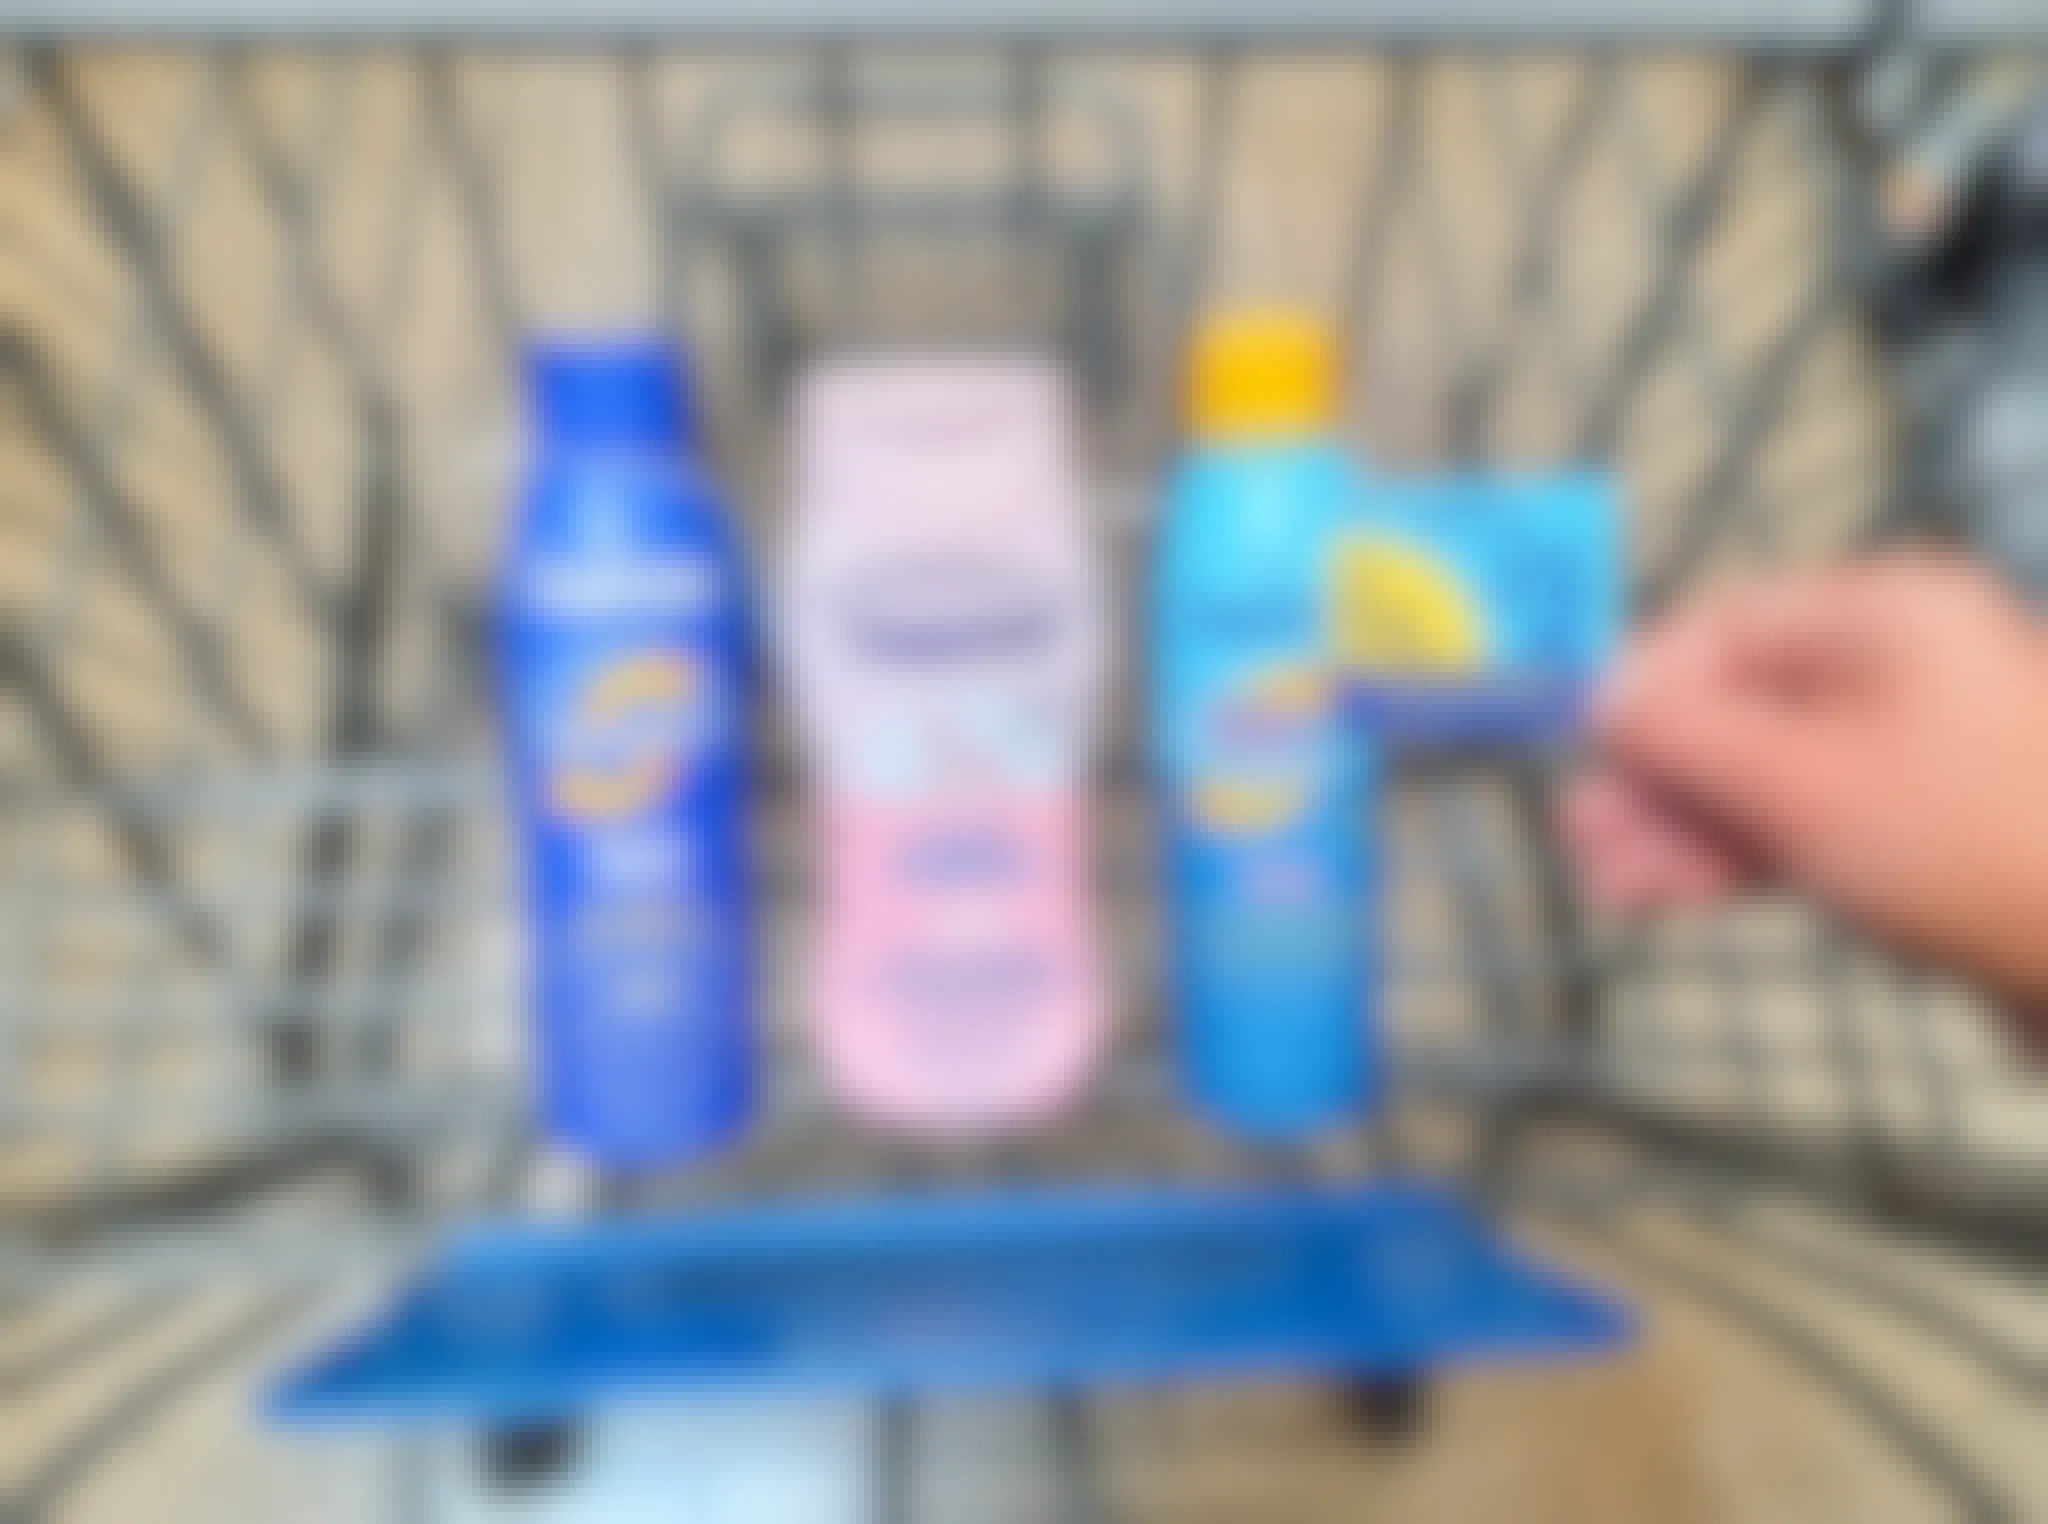 Coppertone Sunscreen products in Walmart shopping cart. Hand is holding a $2 coupon that is attached to one of the products.